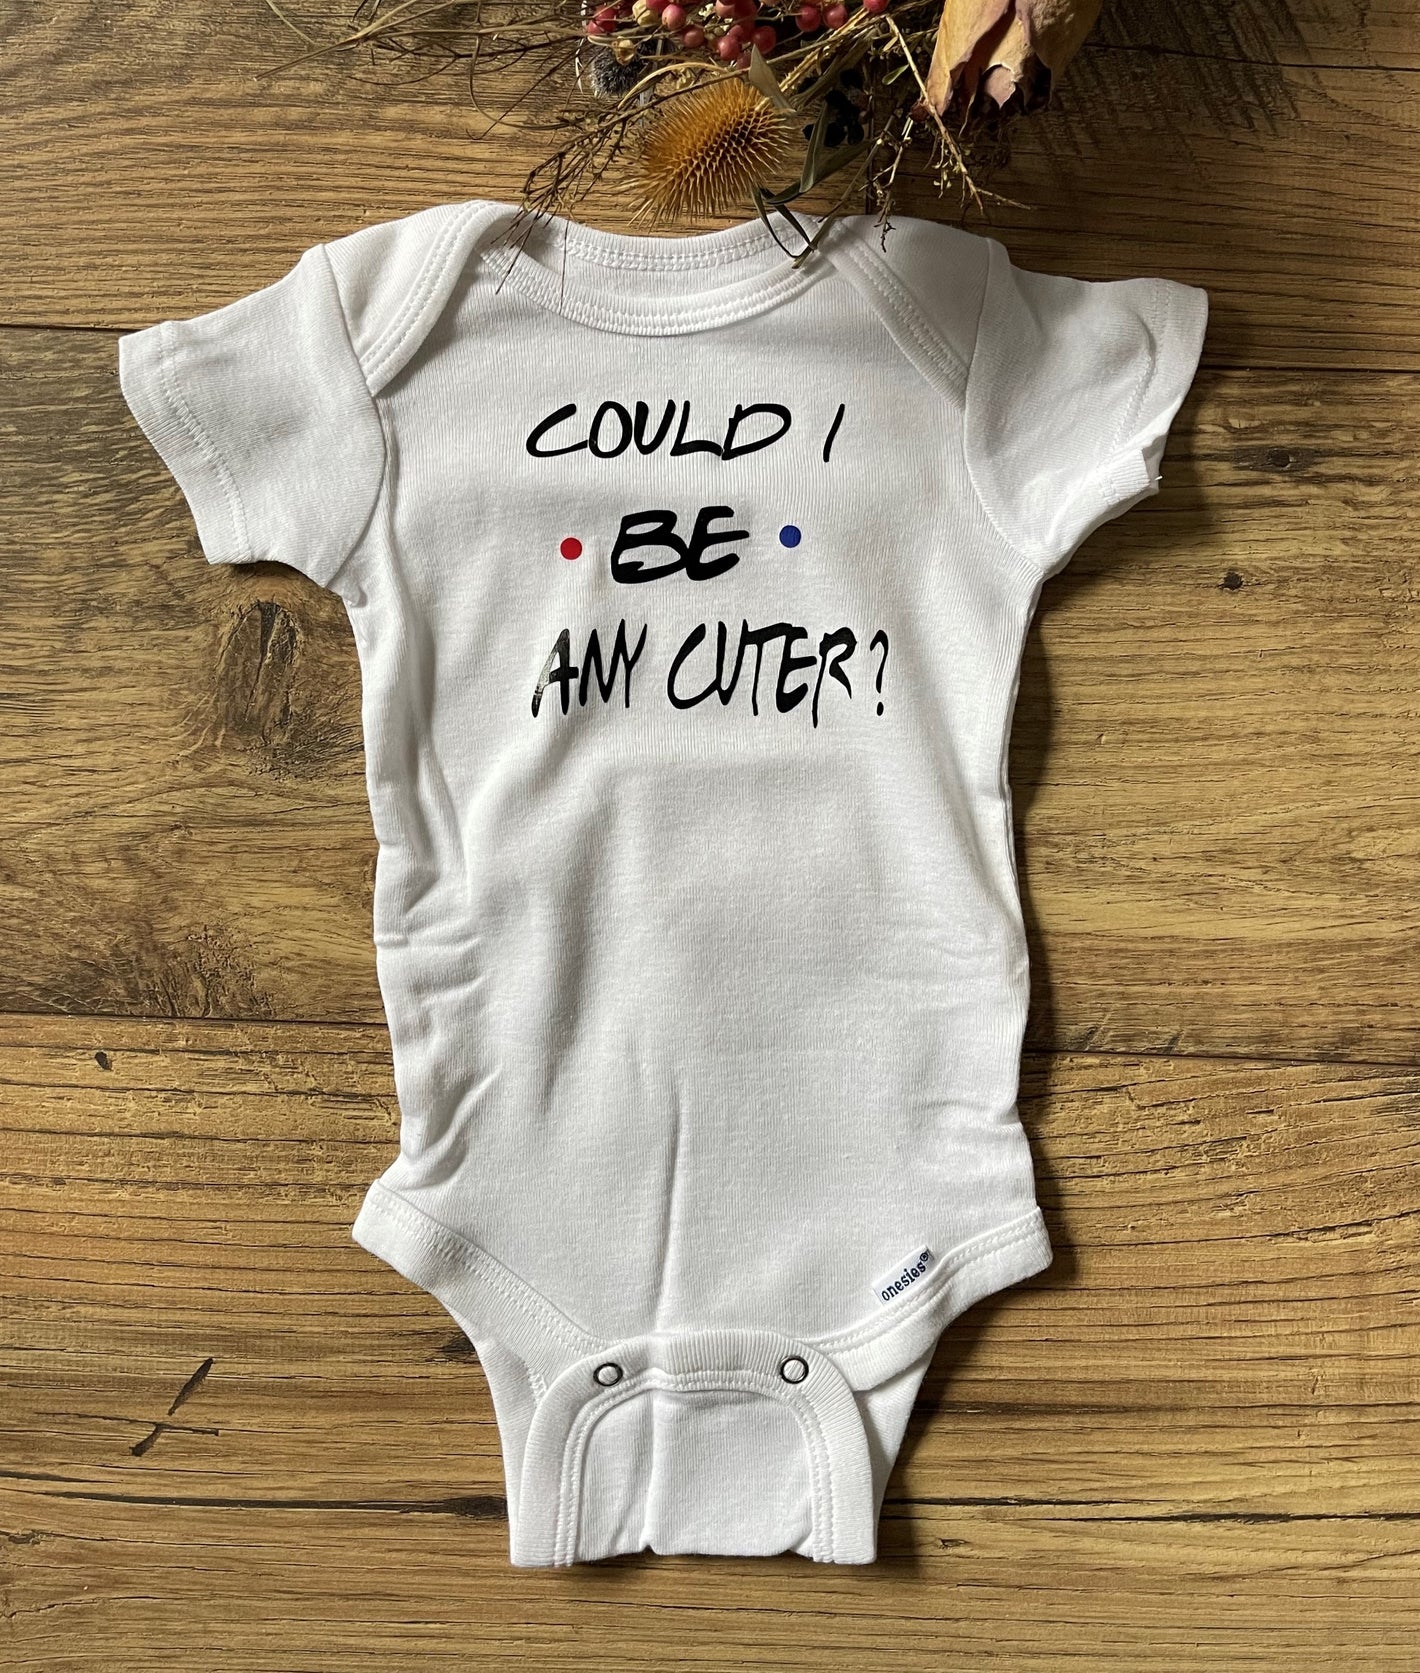 FRIENDS COULD I BE ANY CUTER? Infant Baby Onesie Bodysuit Outfit, Baby Shower Gift